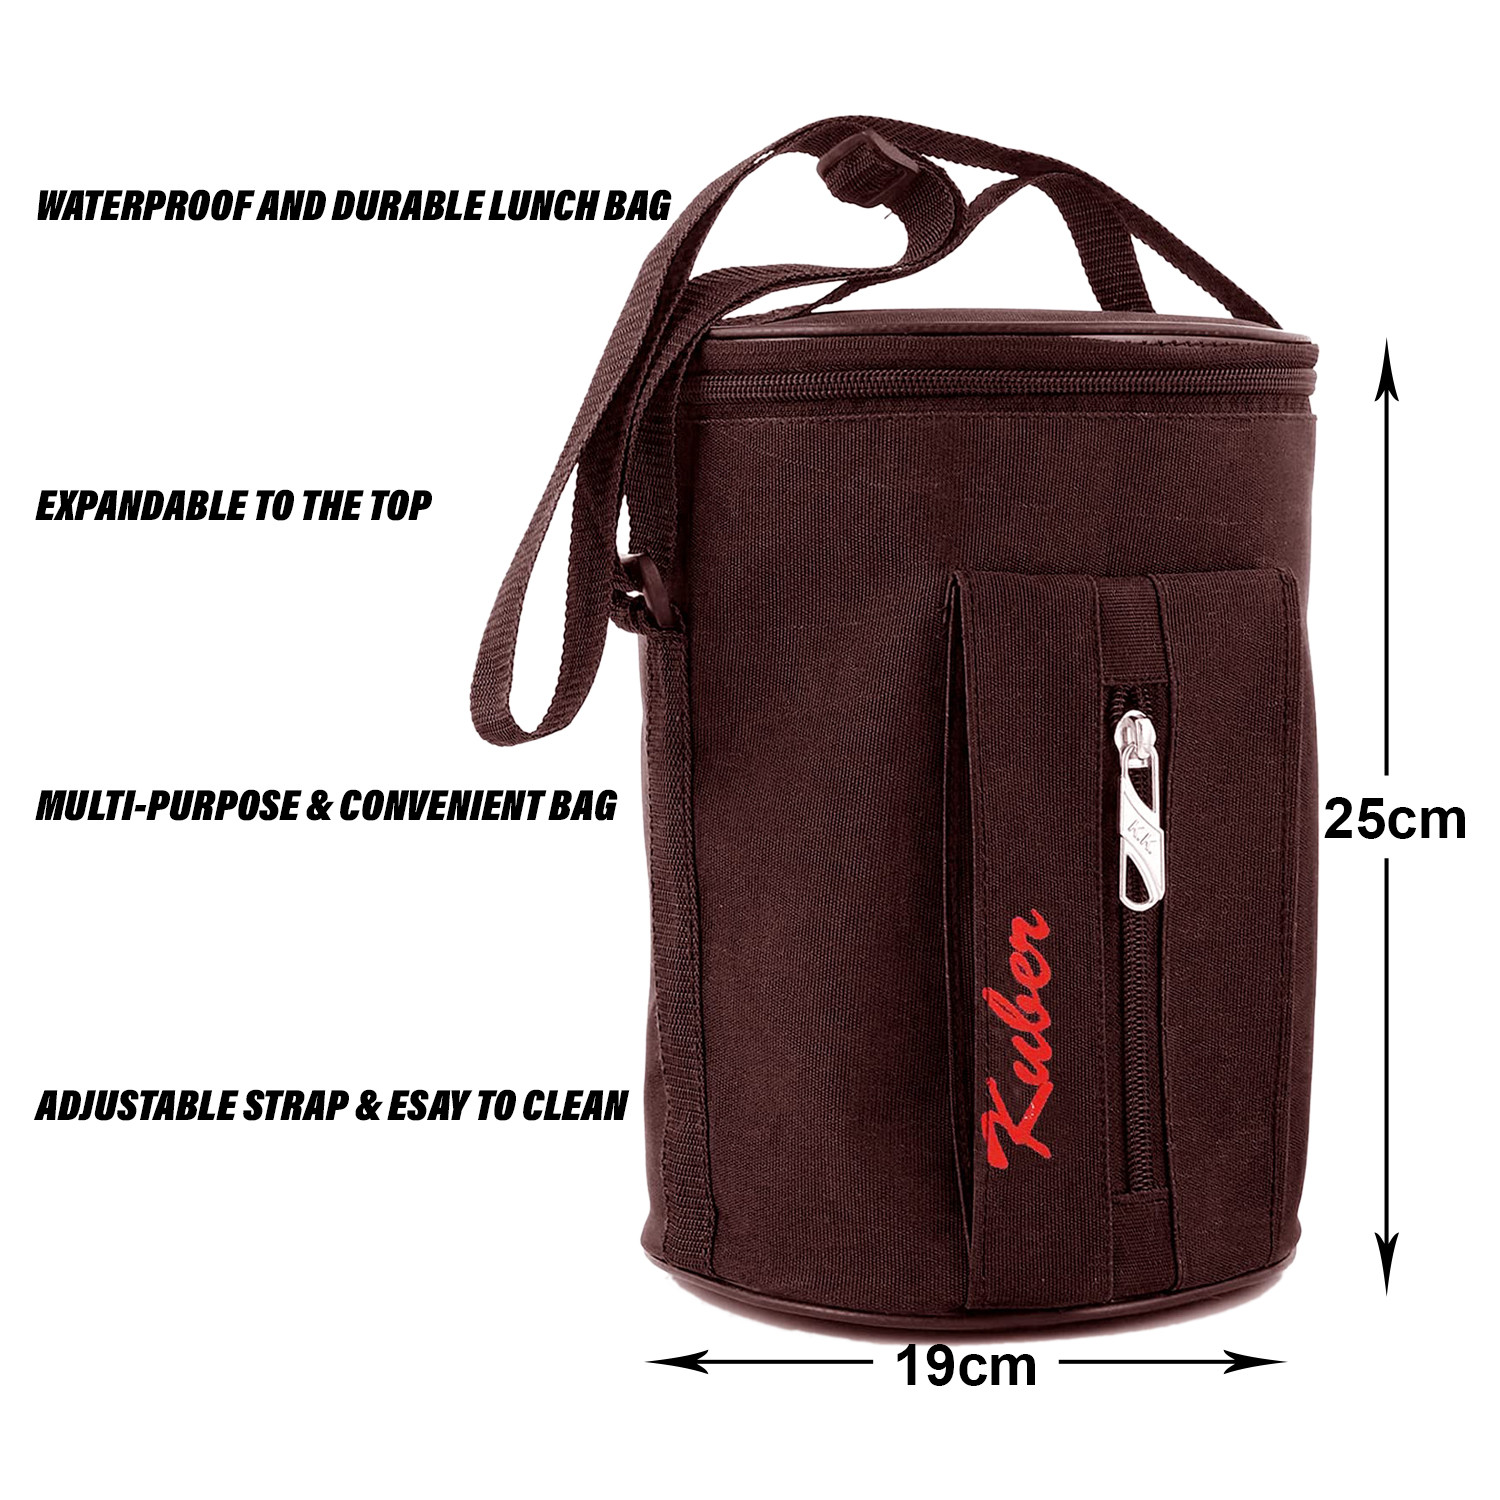 Kuber Industries Lunch Bag|Canvas waterproof Tiffin Bag for Office|Adjustable Shoulder Strap with One Small Zipper Pocket (Brown)